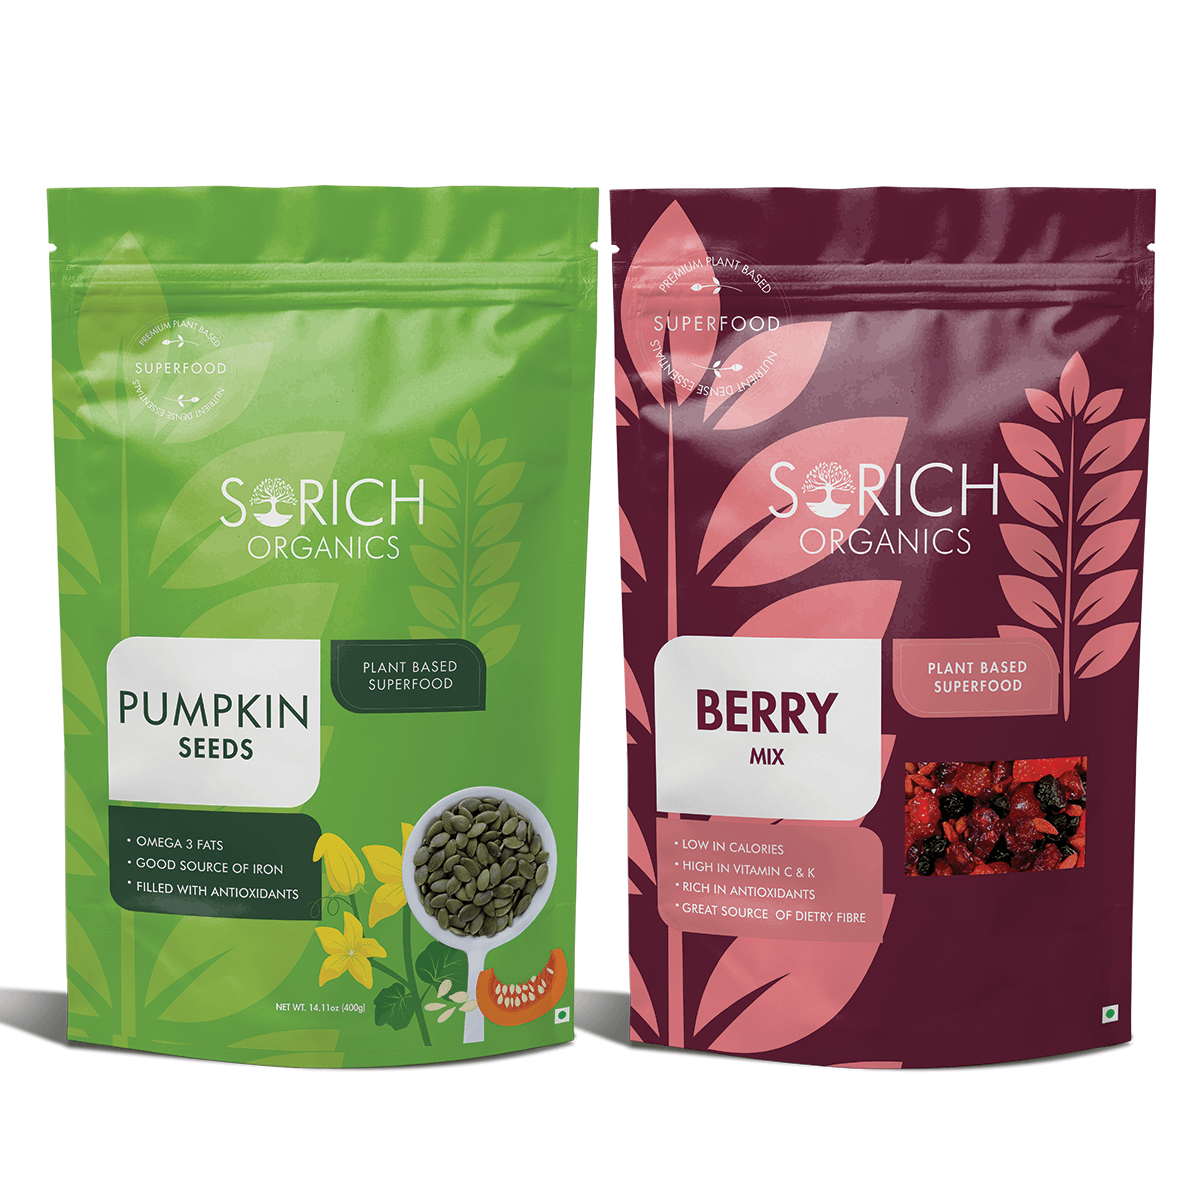 Combo Berries Mix 200 gm and Pumpkin Seed 400 gm 600 gm - Sorich